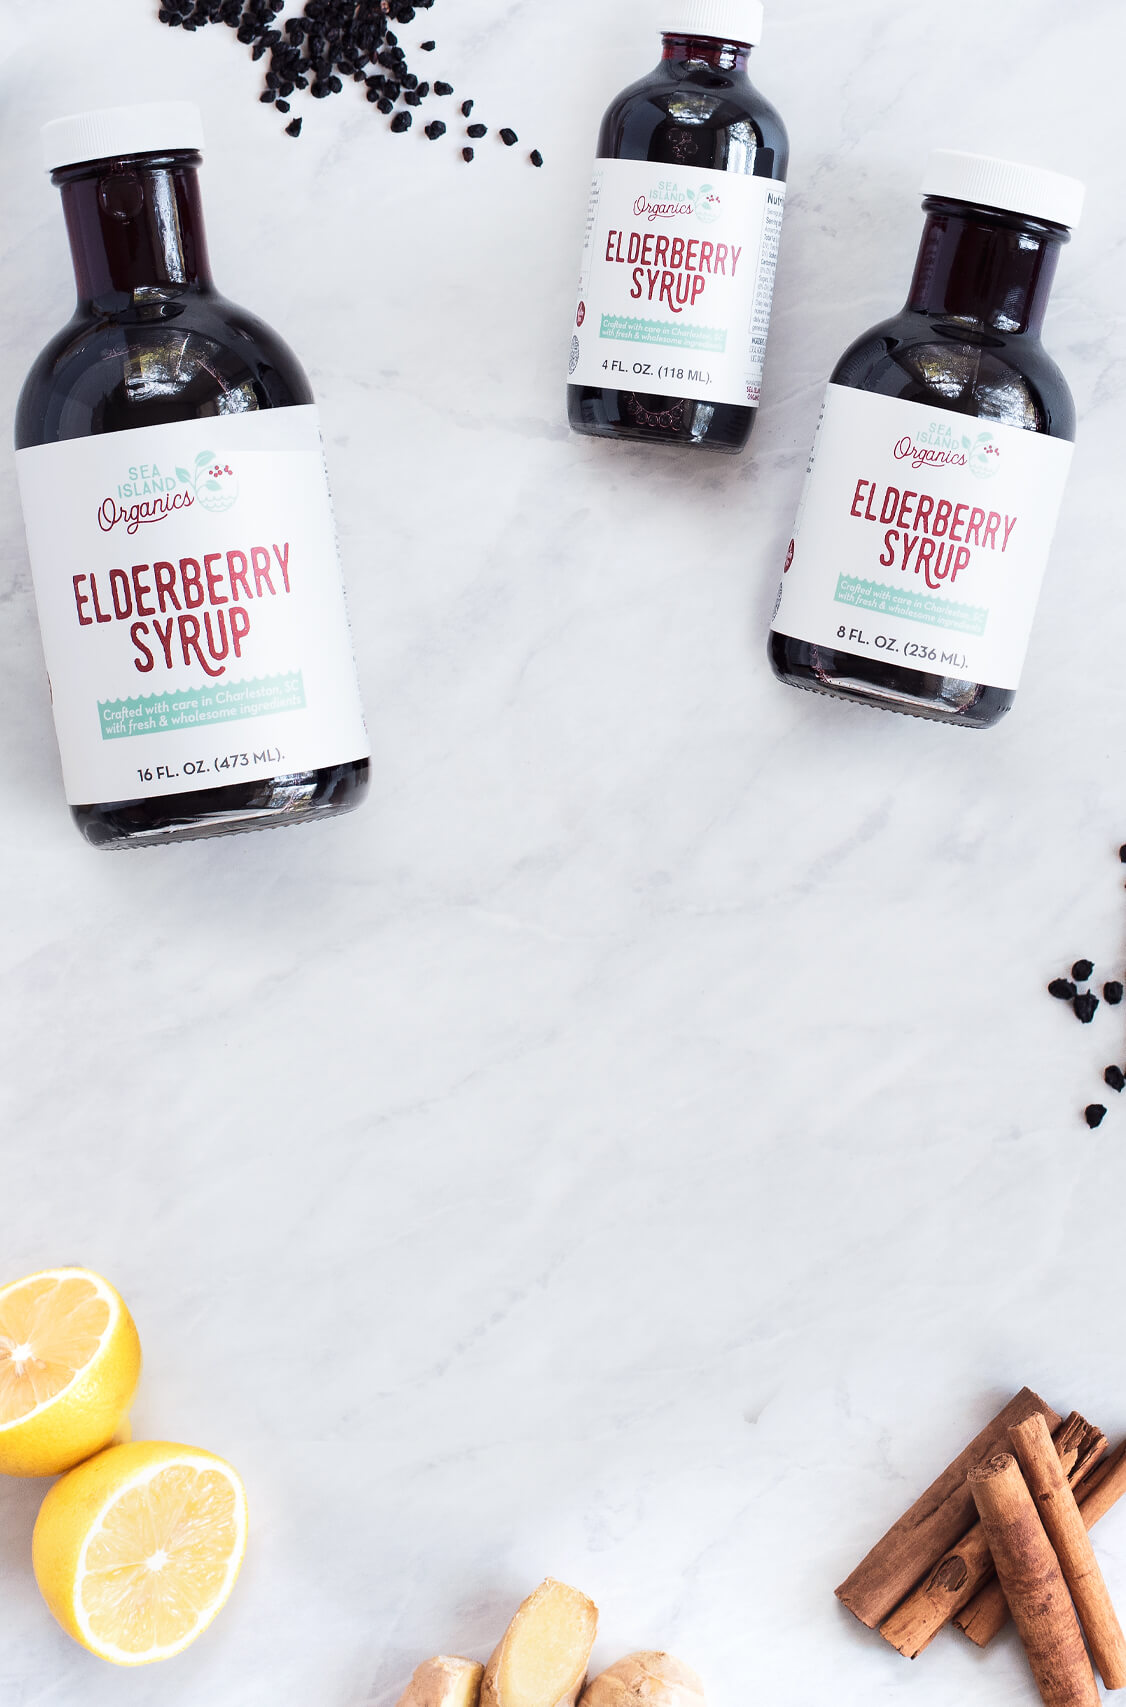 Handcrafted elderberry syrups & ingredients on a marble countertop.